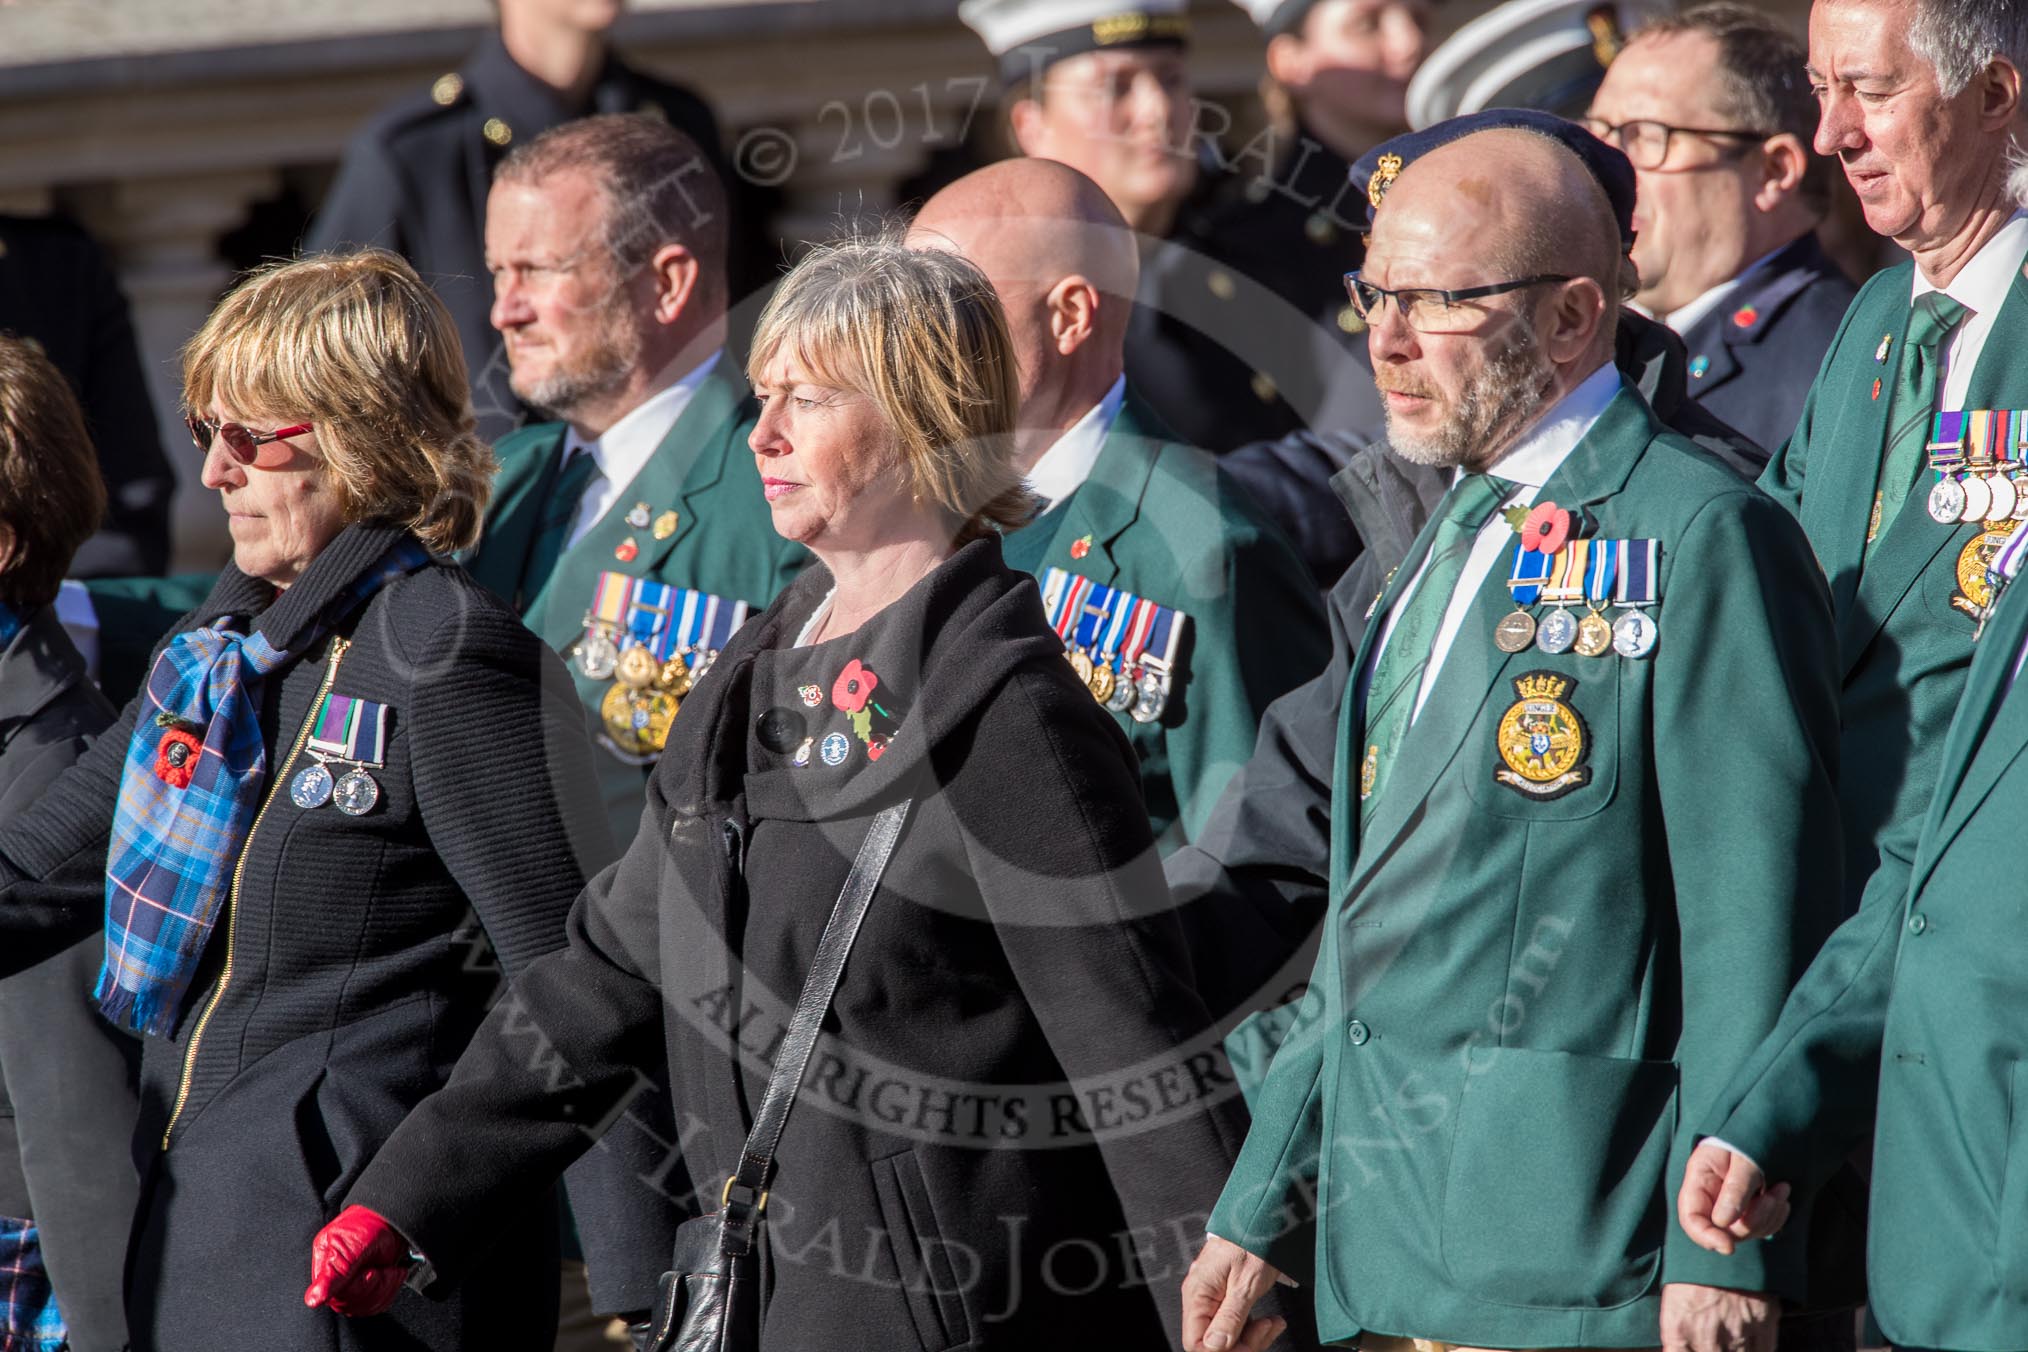 Fleet Air Arm Junglies Association  (Group E12, 22 members) during the Royal British Legion March Past on Remembrance Sunday at the Cenotaph, Whitehall, Westminster, London, 11 November 2018, 11:43.